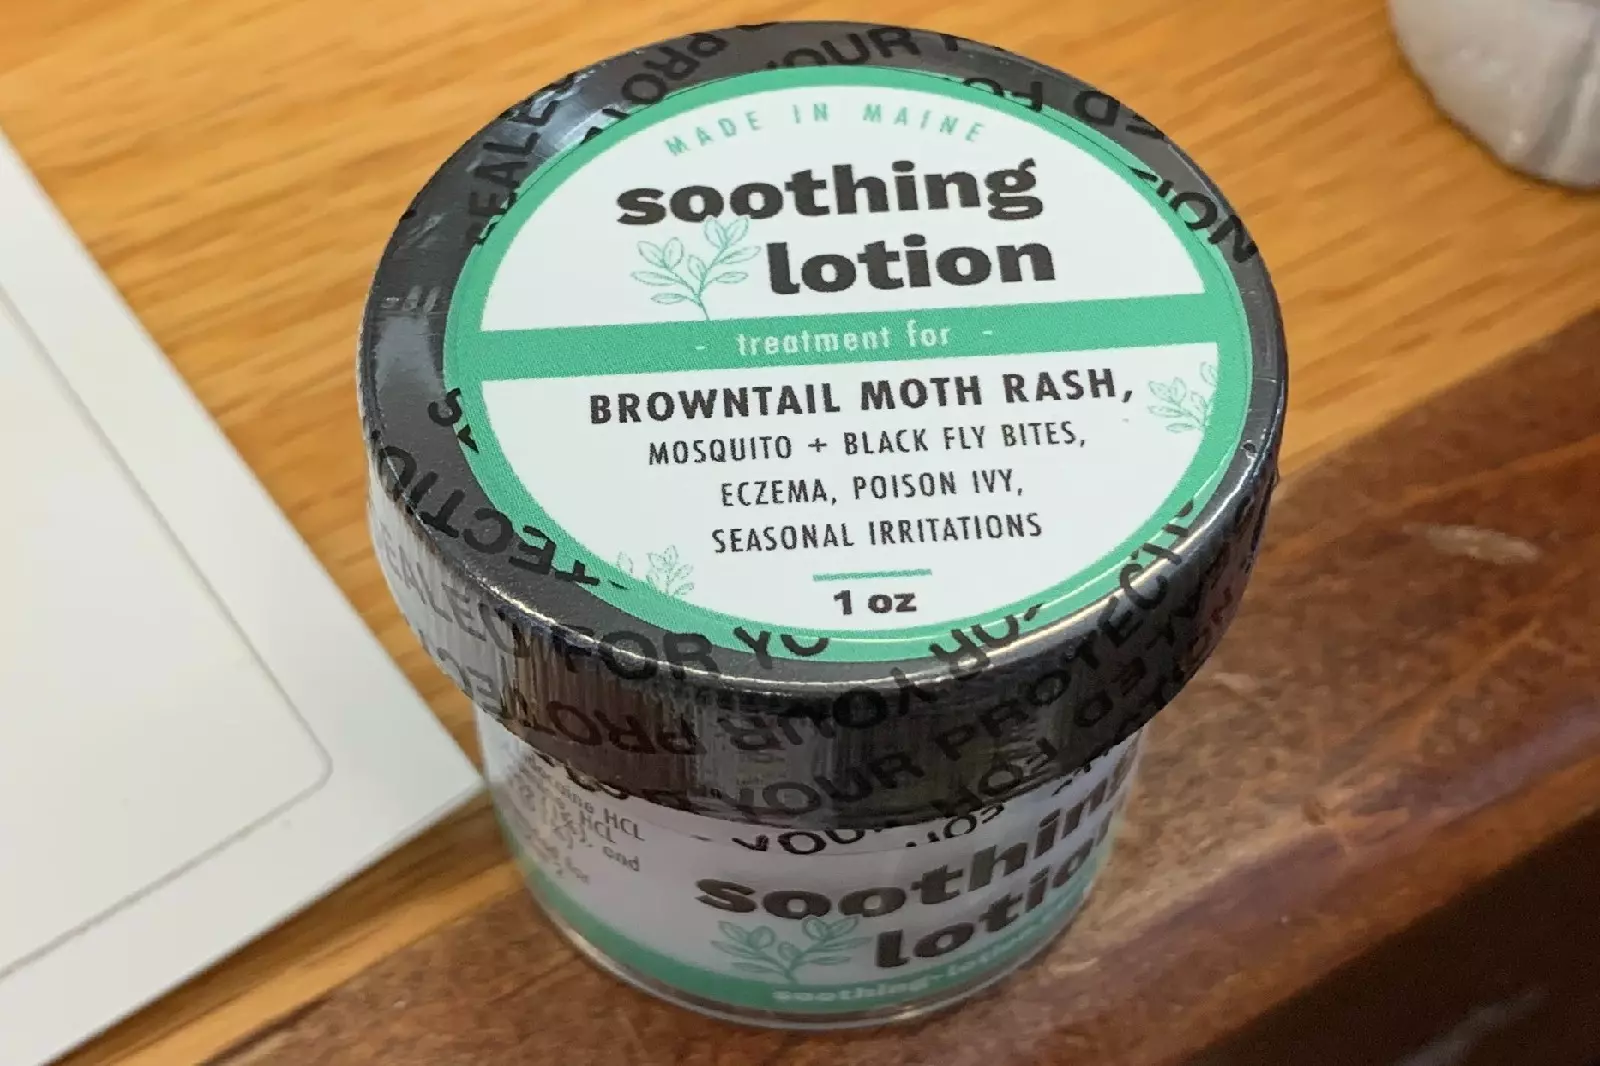 https://townsquare.media/site/495/files/2022/05/attachment-Browntail-Caterpillar-Rash-Soother-2022-Tub-2.jpg?w=1600&q=75